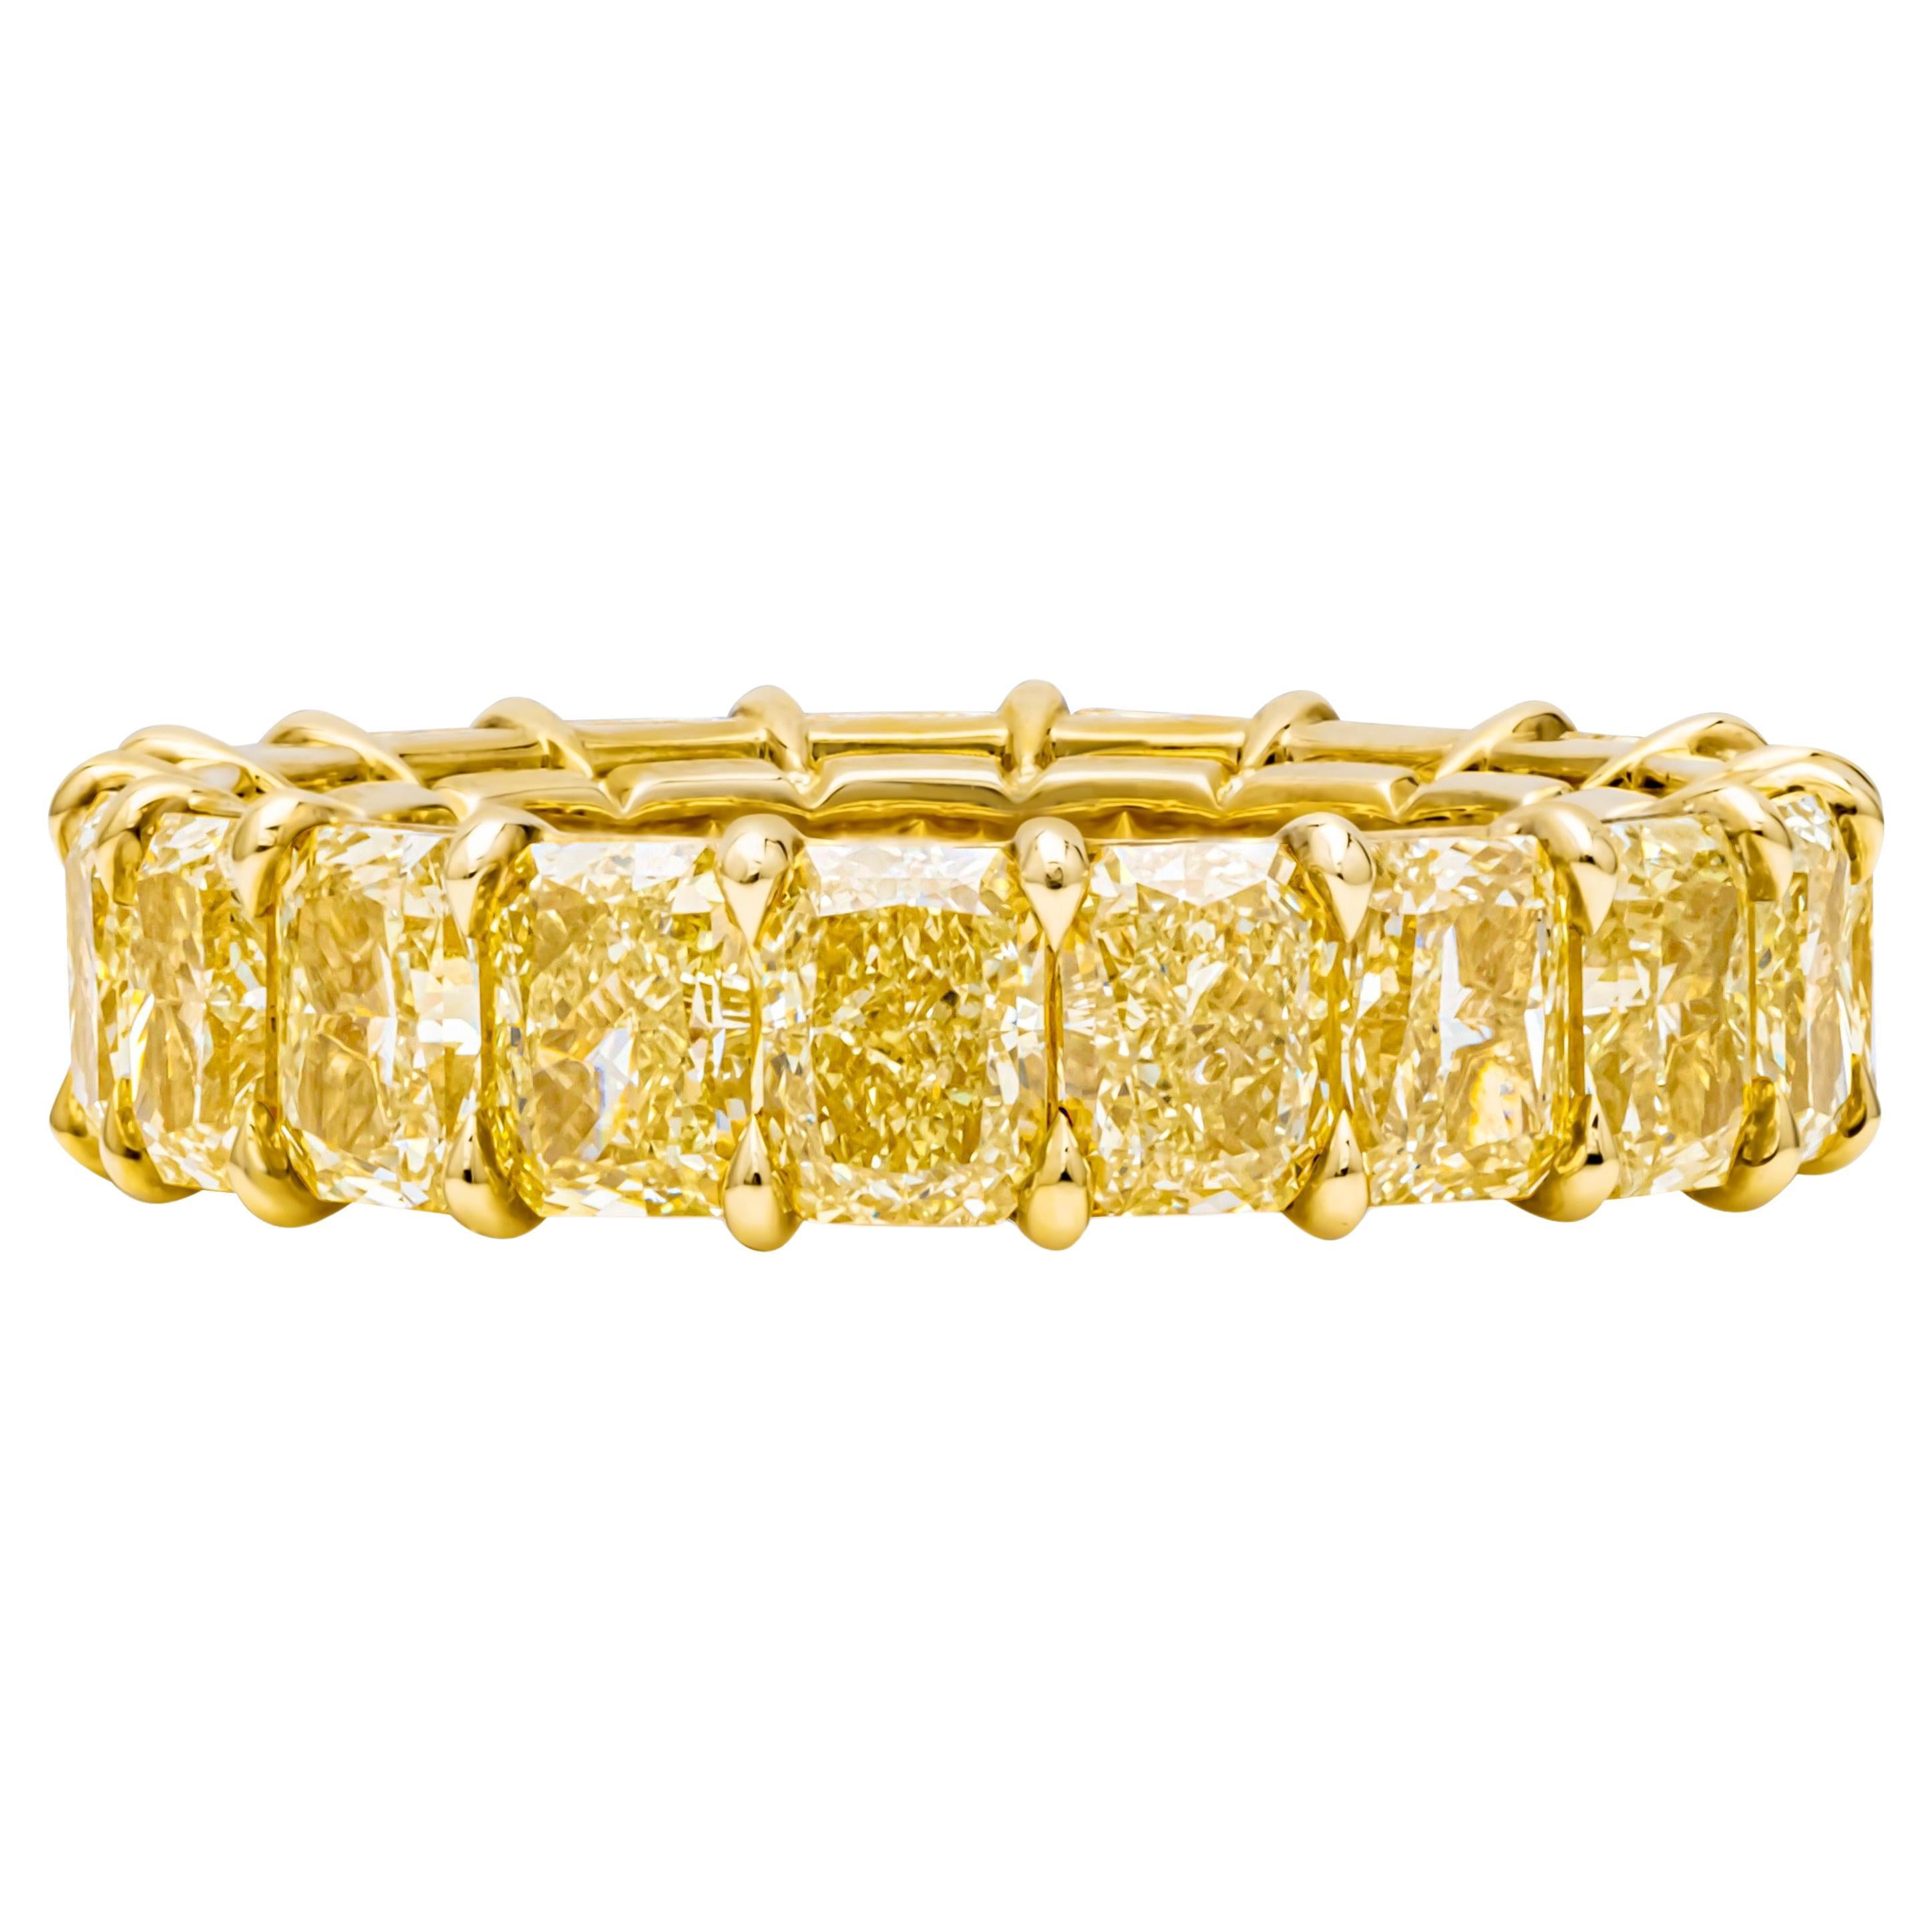 7.80 Carats Total Radiant Cut Fancy Yellow Diamond Eternity Wedding Band For Sale